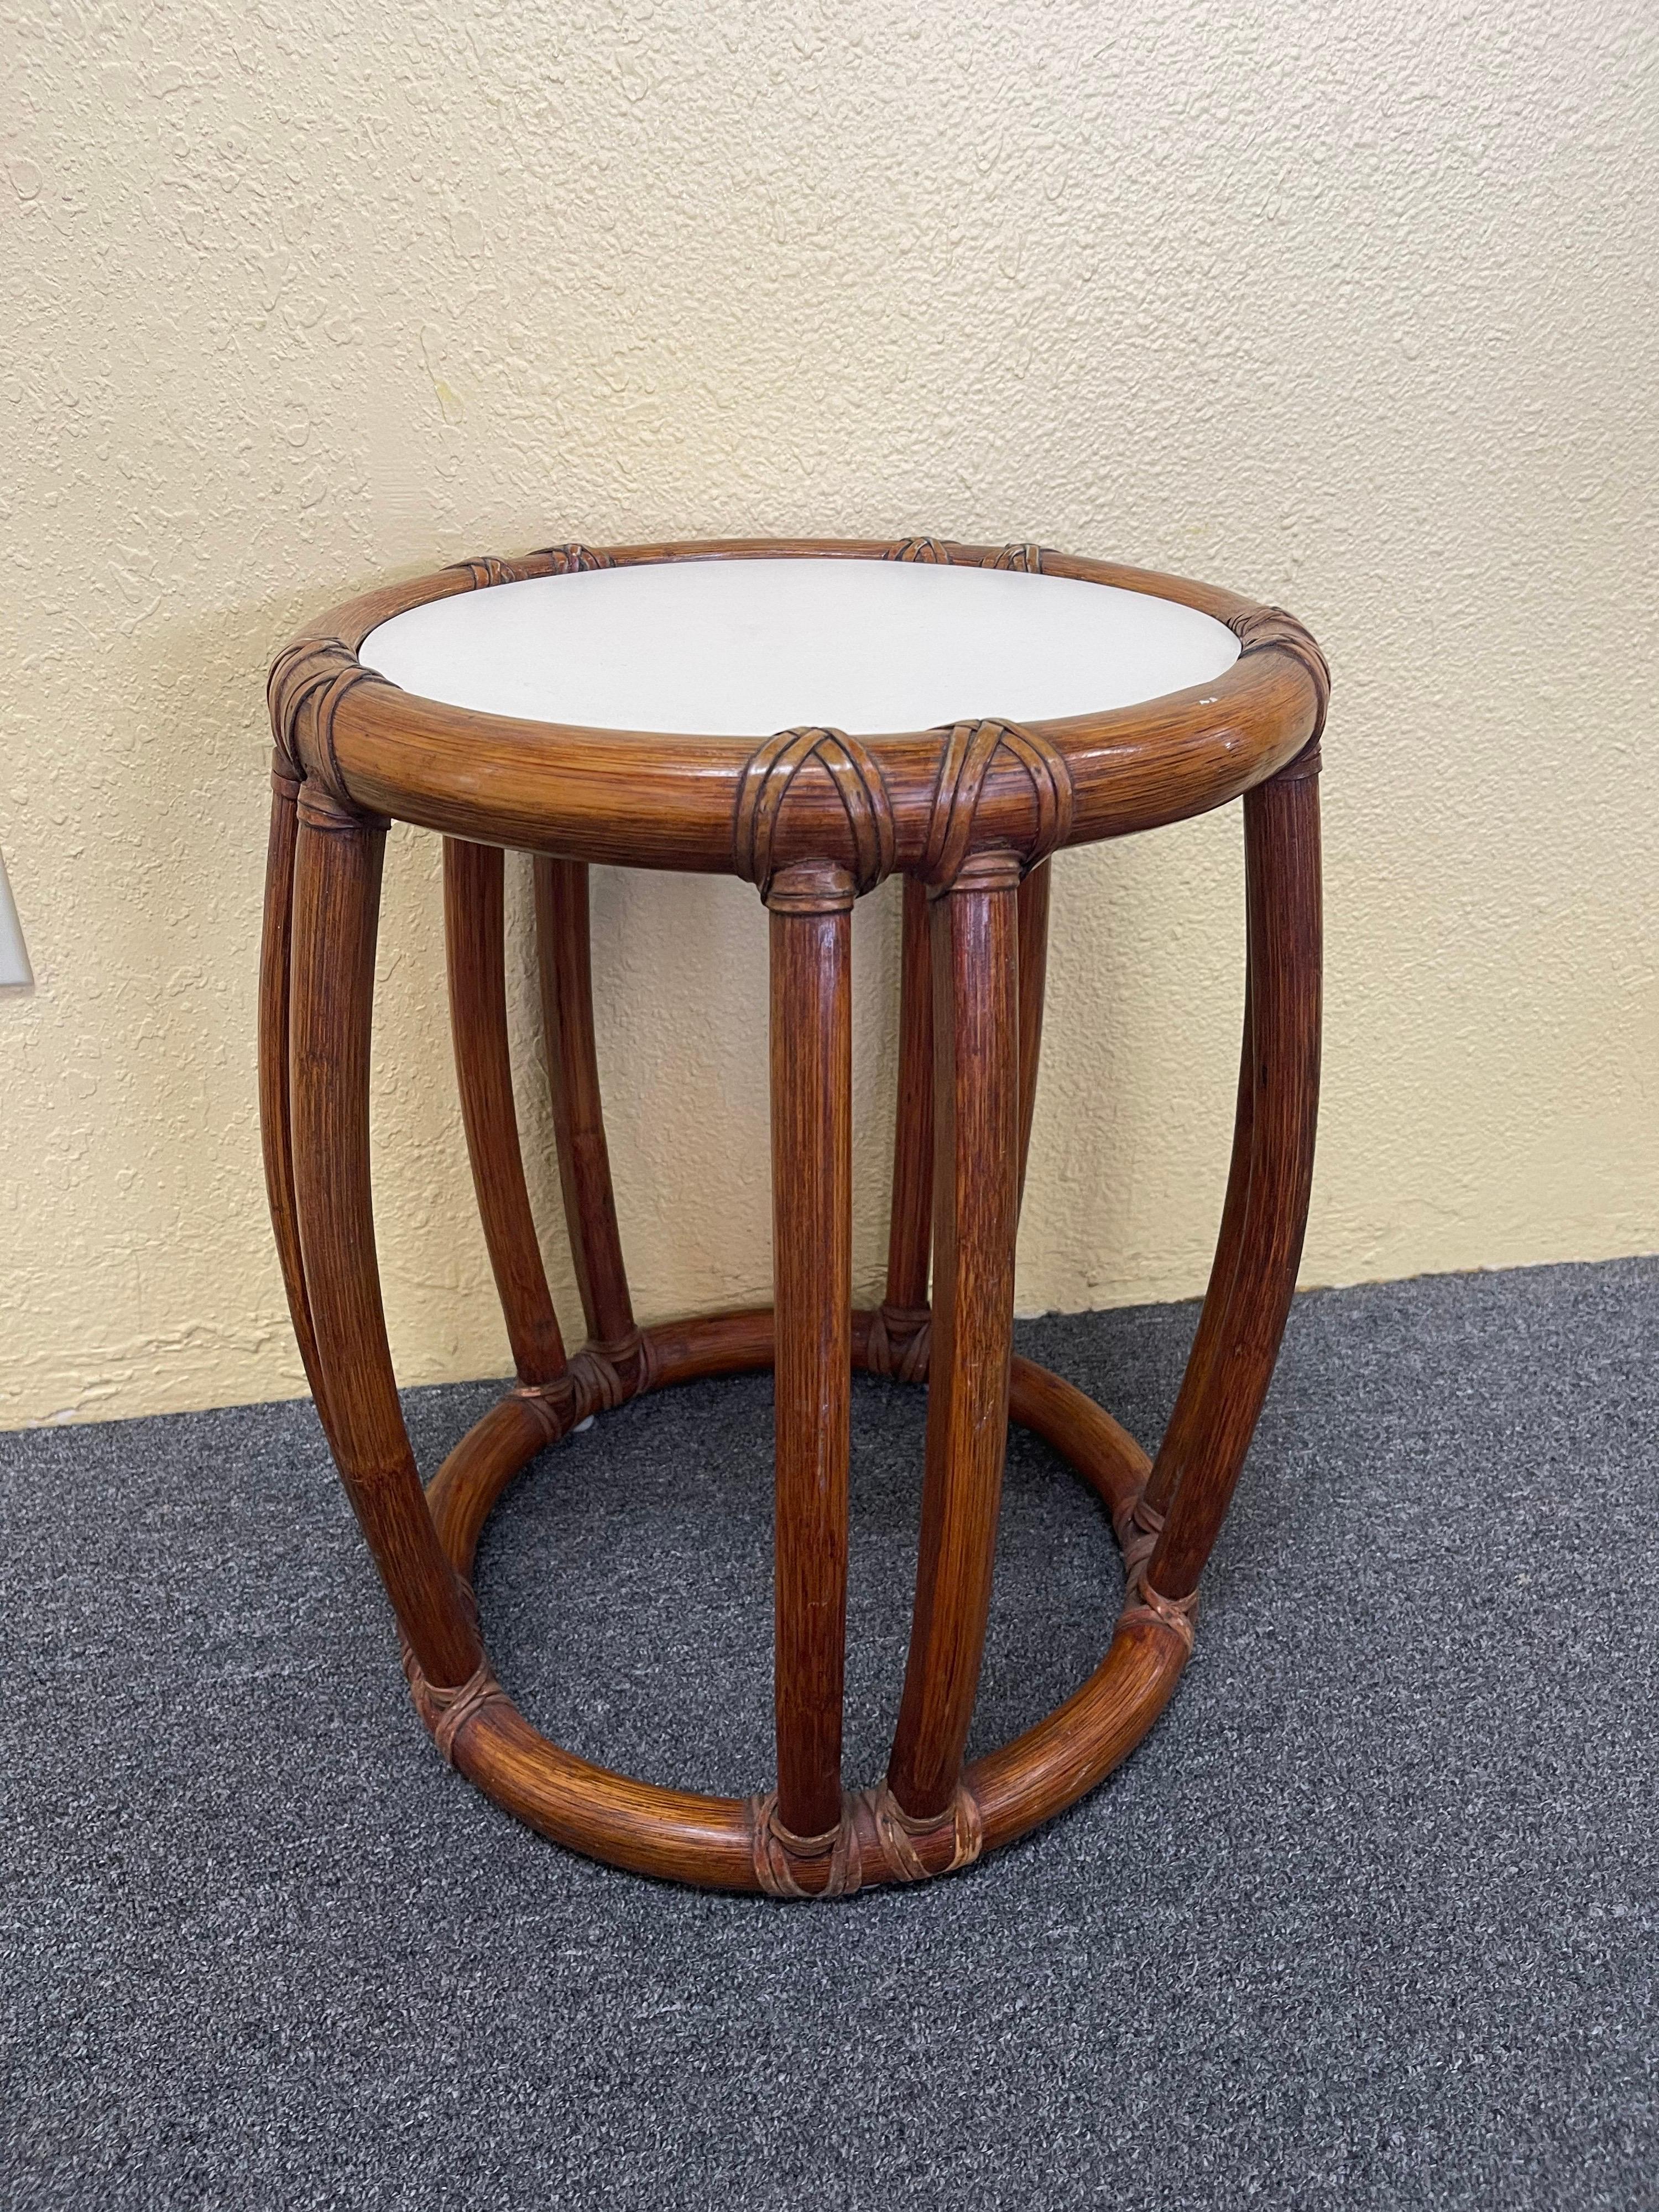 20th Century Bamboo Side Tables / Garden Stools by McGuire Furniture Co. of San Francisco